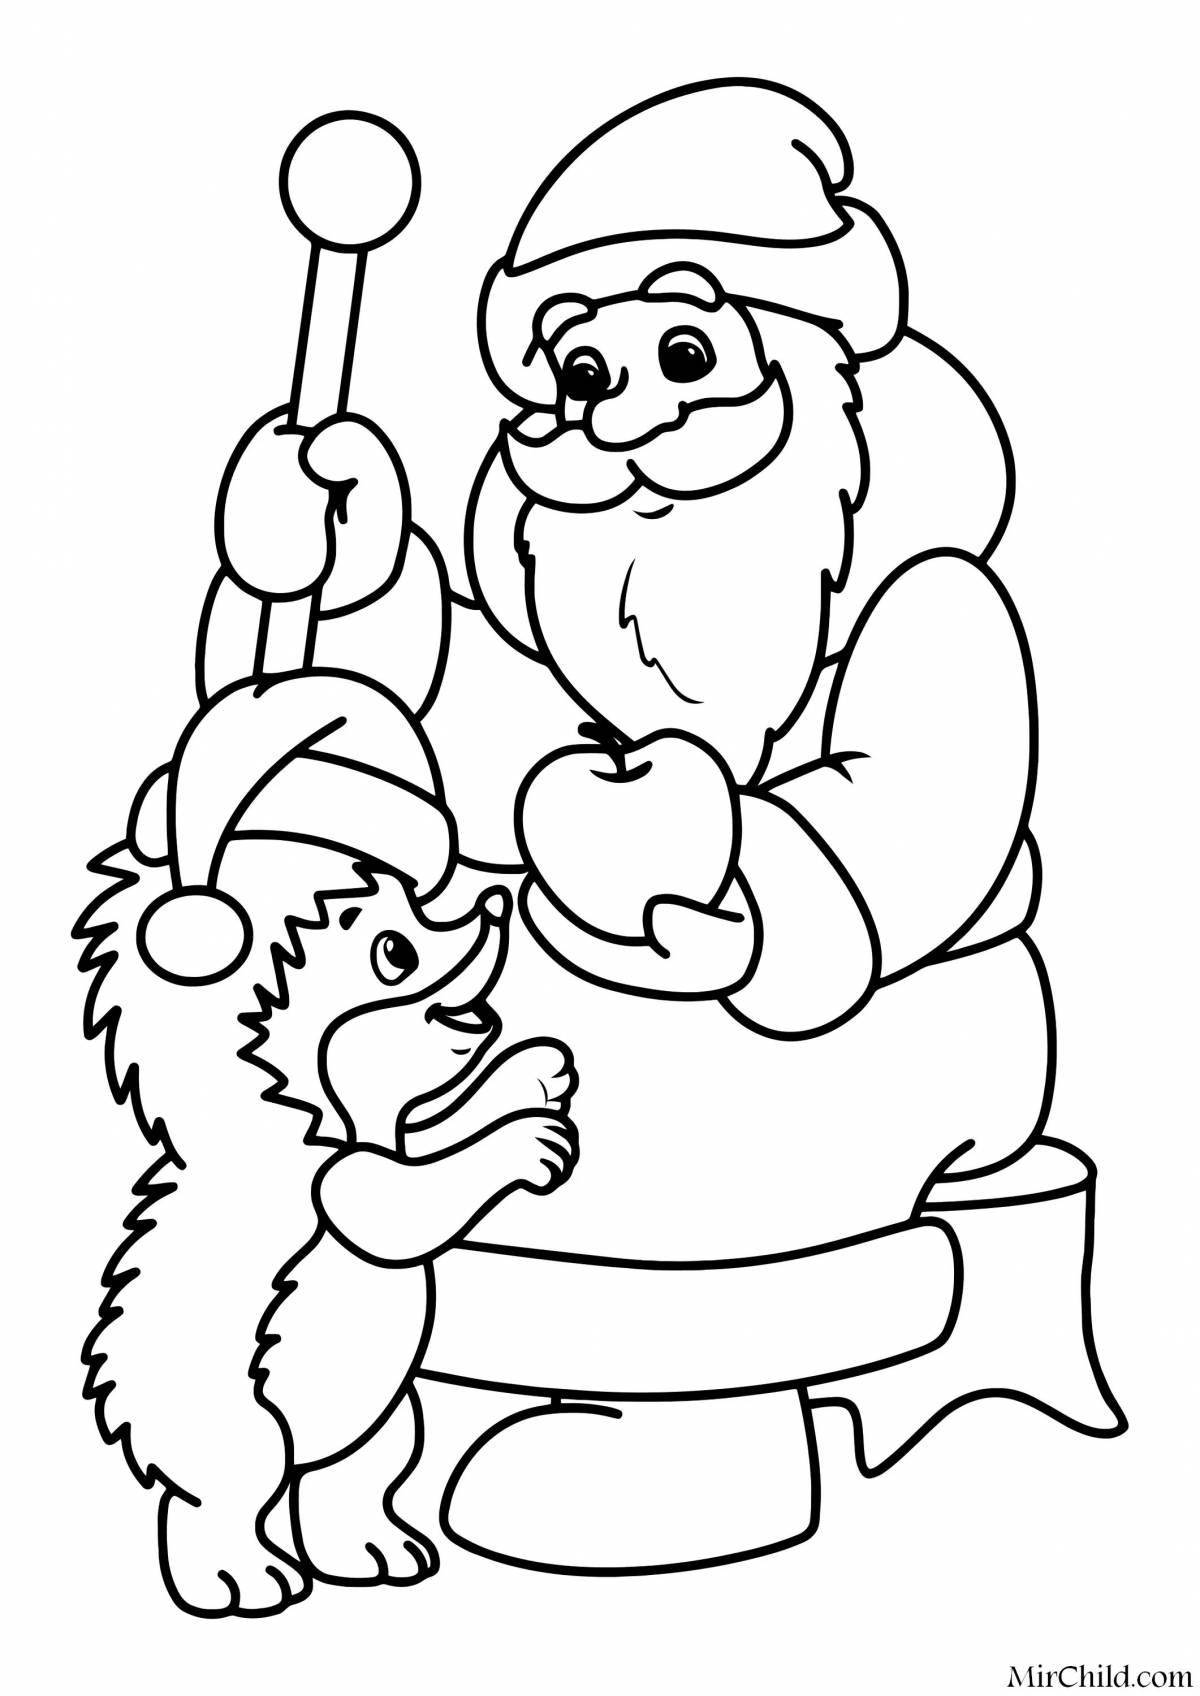 Coloring page wild santa claus and animals